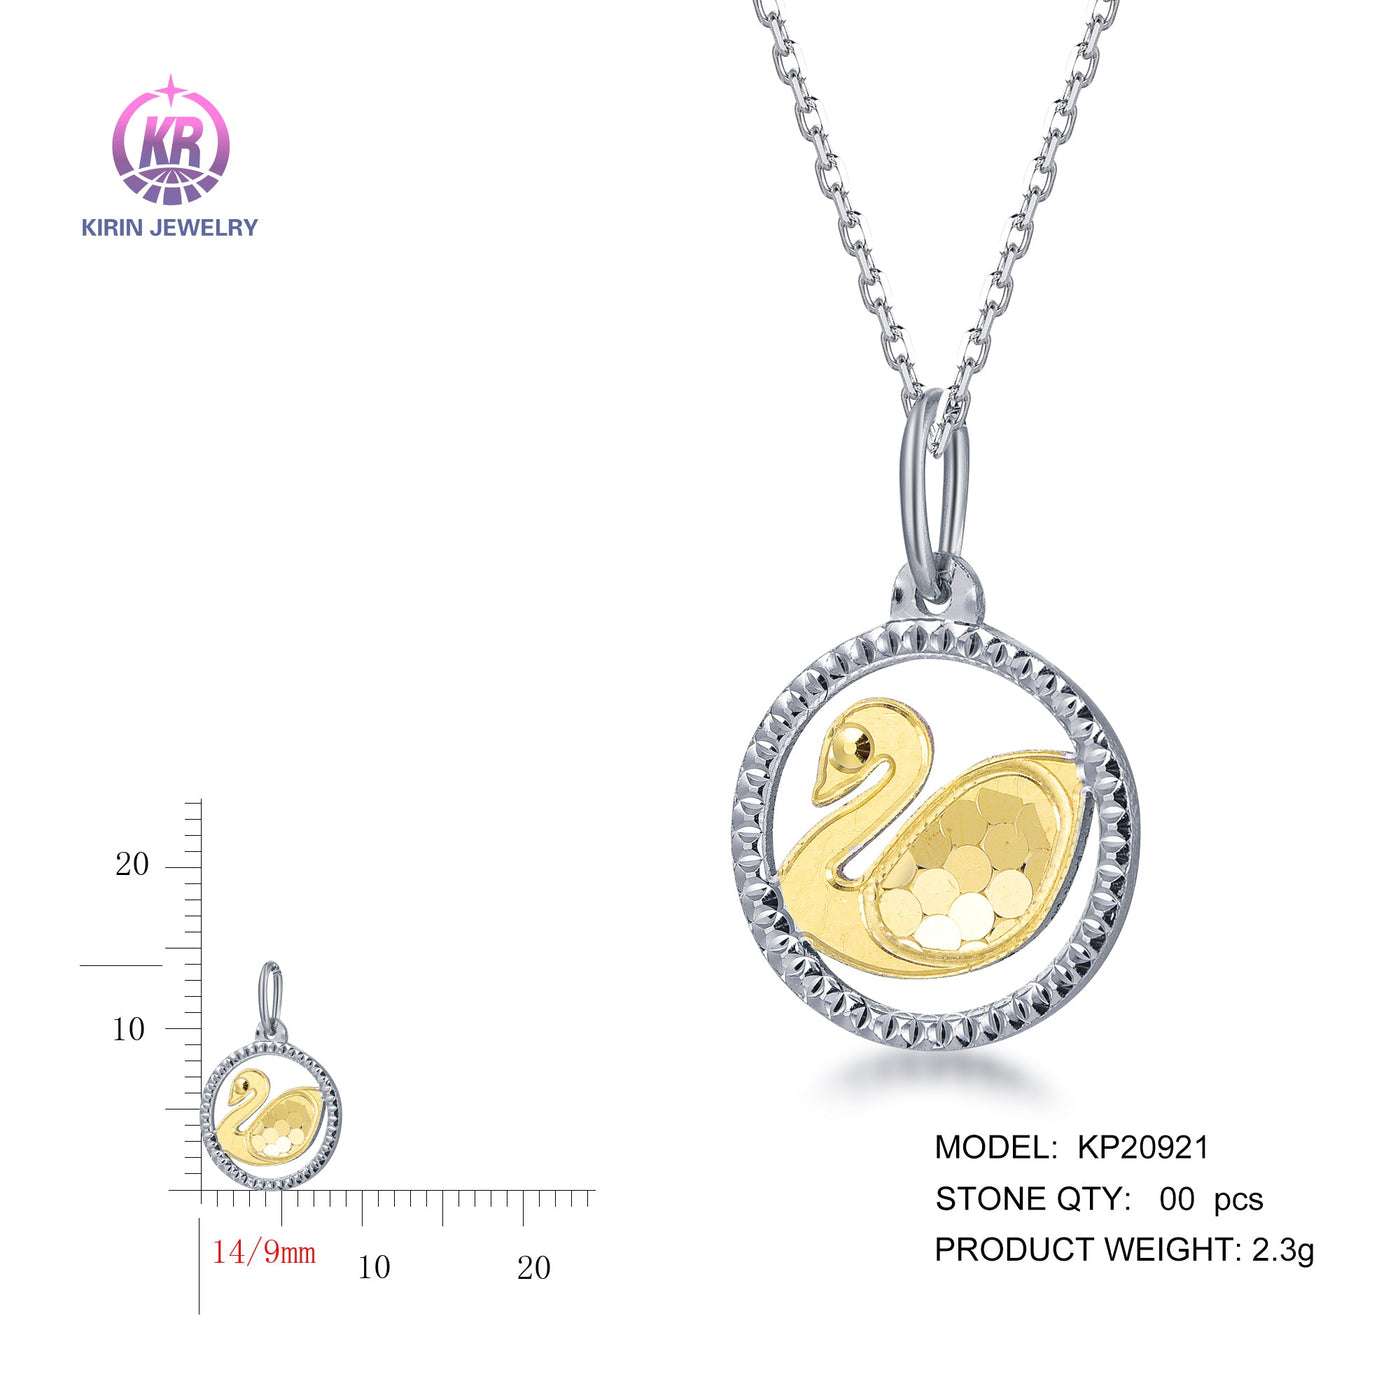 925 silver pendant with 2-tone plating rhodium and 14K gold KP20921 Kirin Jewelry